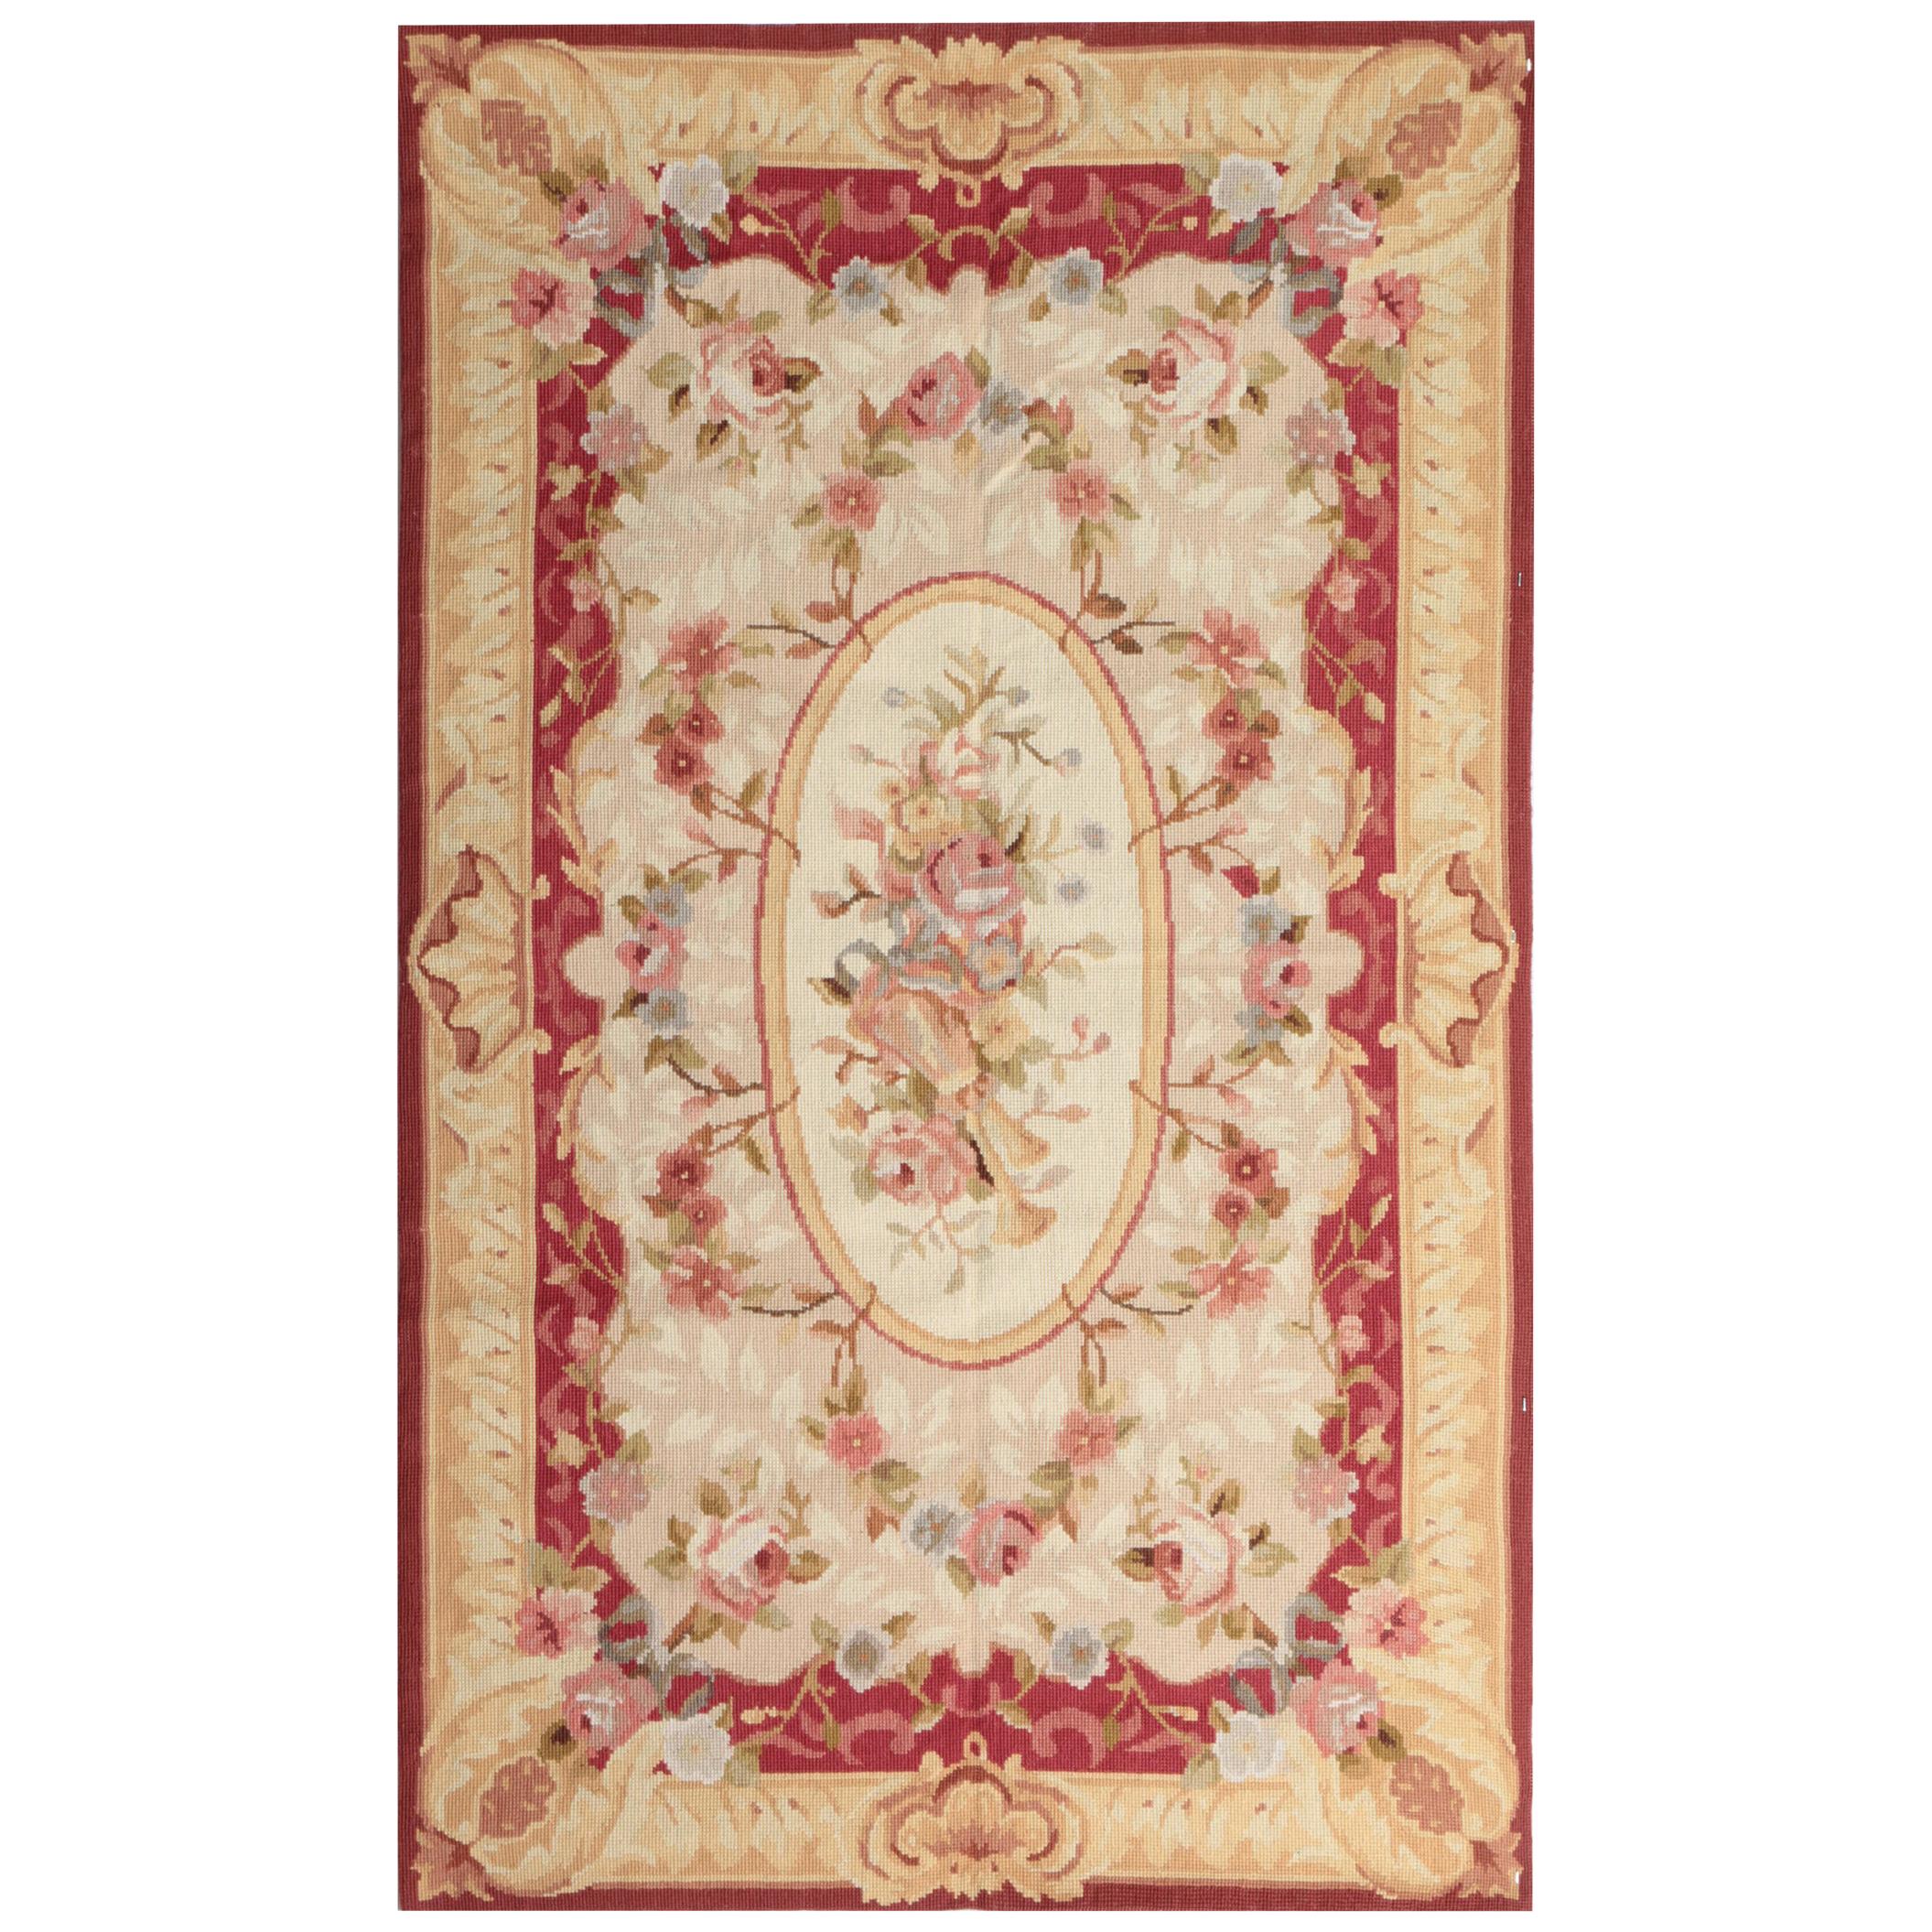 Luxury Red Rug, Floral Aubusson Style Rugs, Needlepoint Carpet Flat-Weave Rug